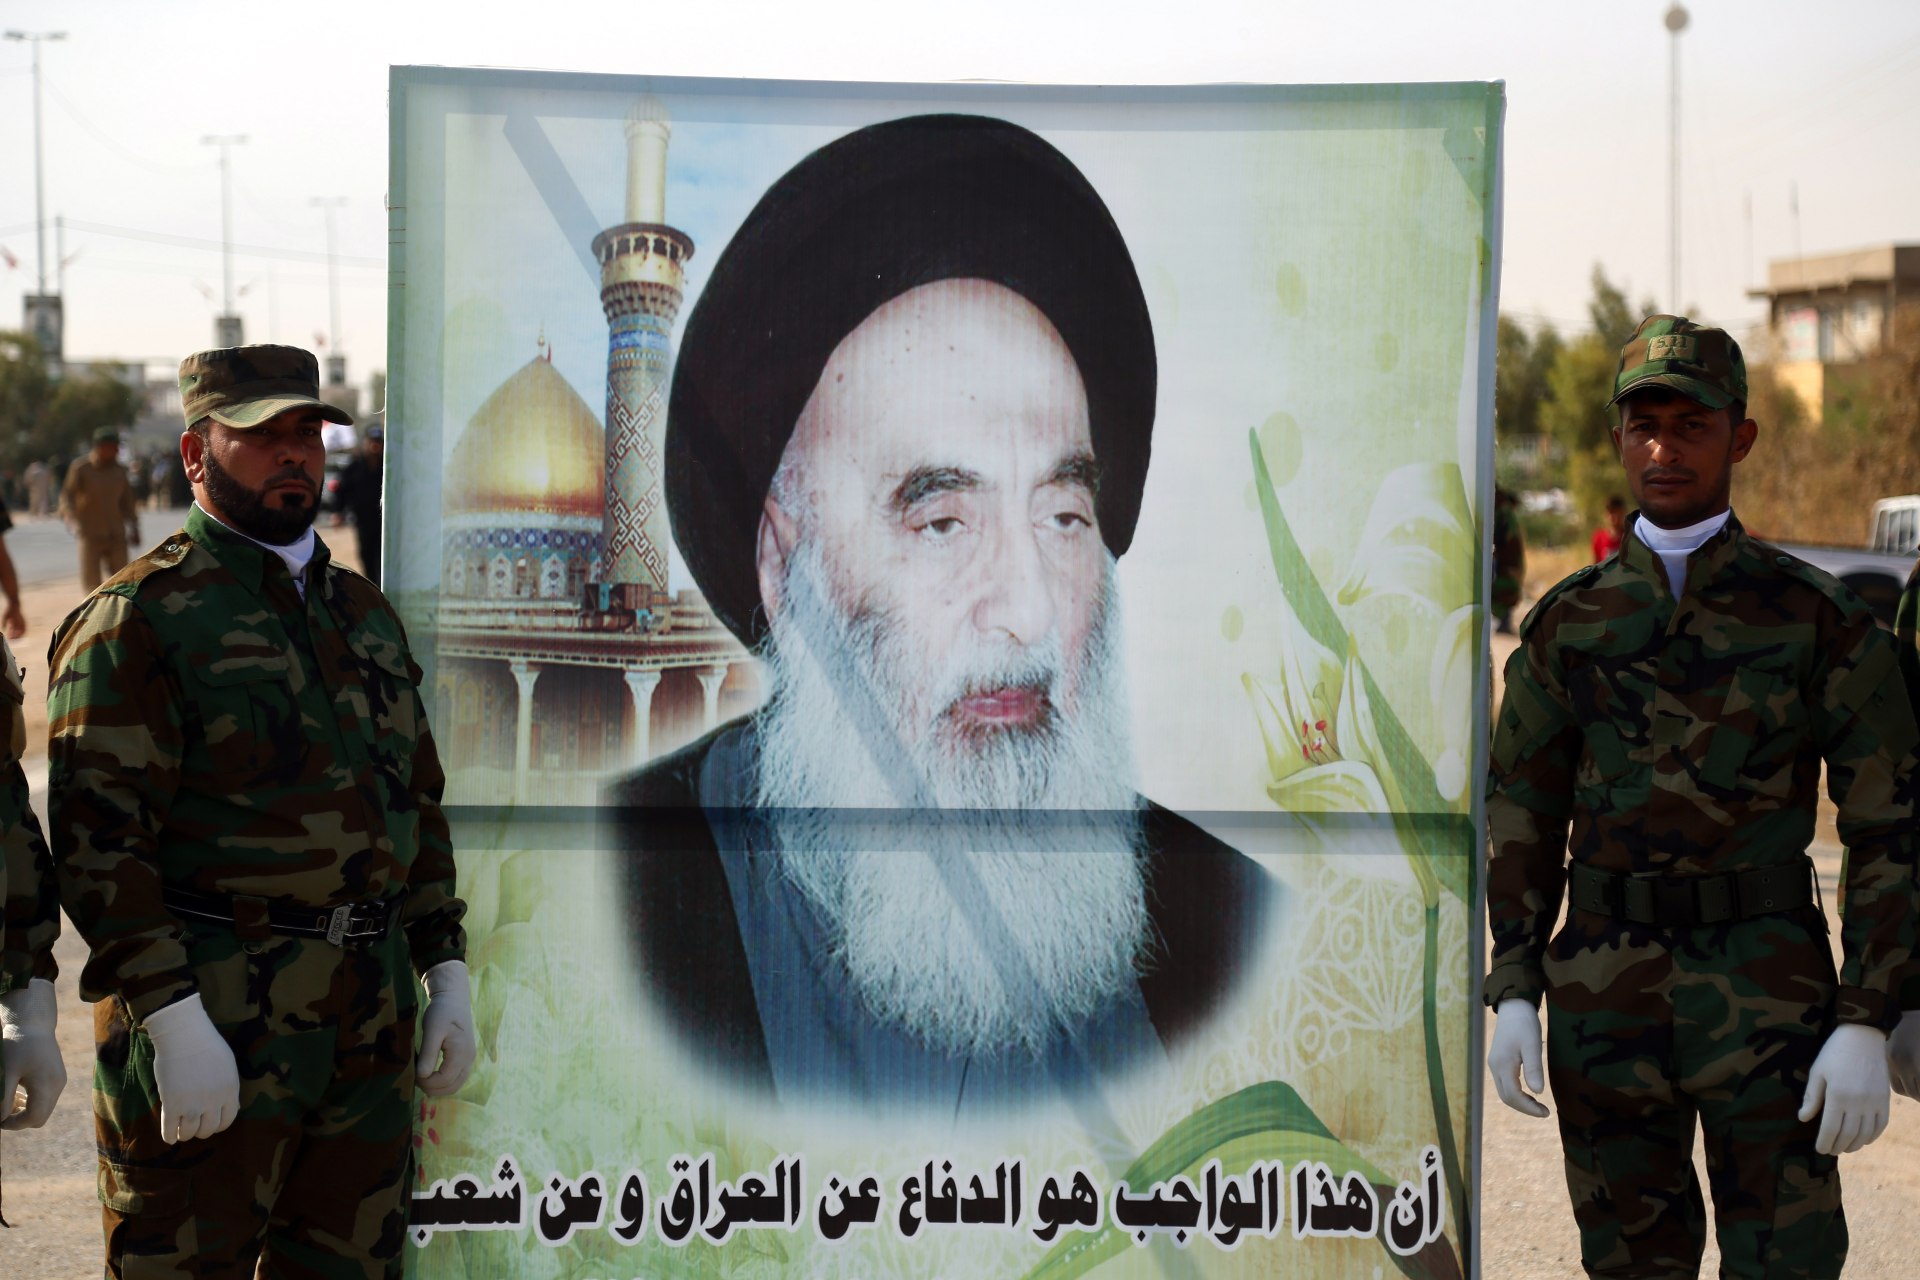 Members of the Popular Mobilisation carrying a large banner depicting the image of Shiite cleric Grand Ayatollah Ali al-Sistani in Najaf (AFP)